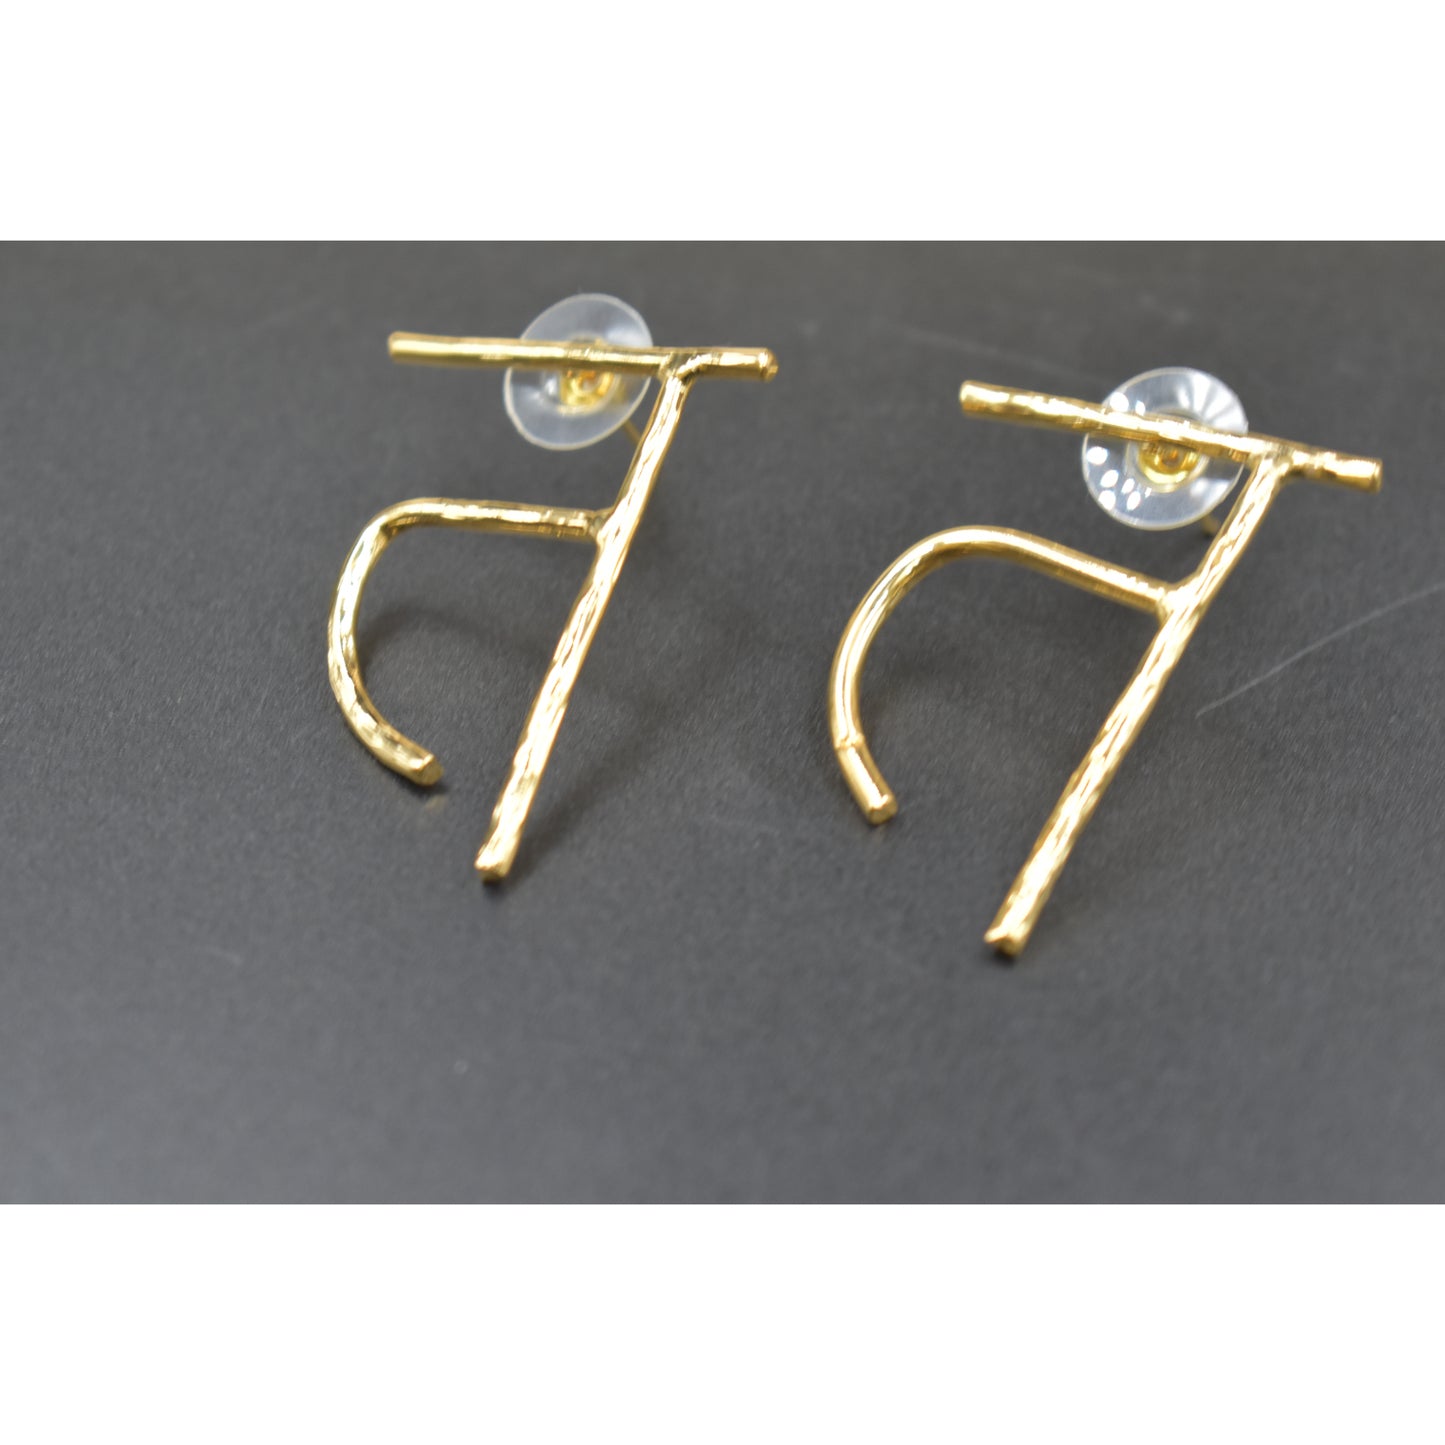 A pair of premium quality gold  plating word earing